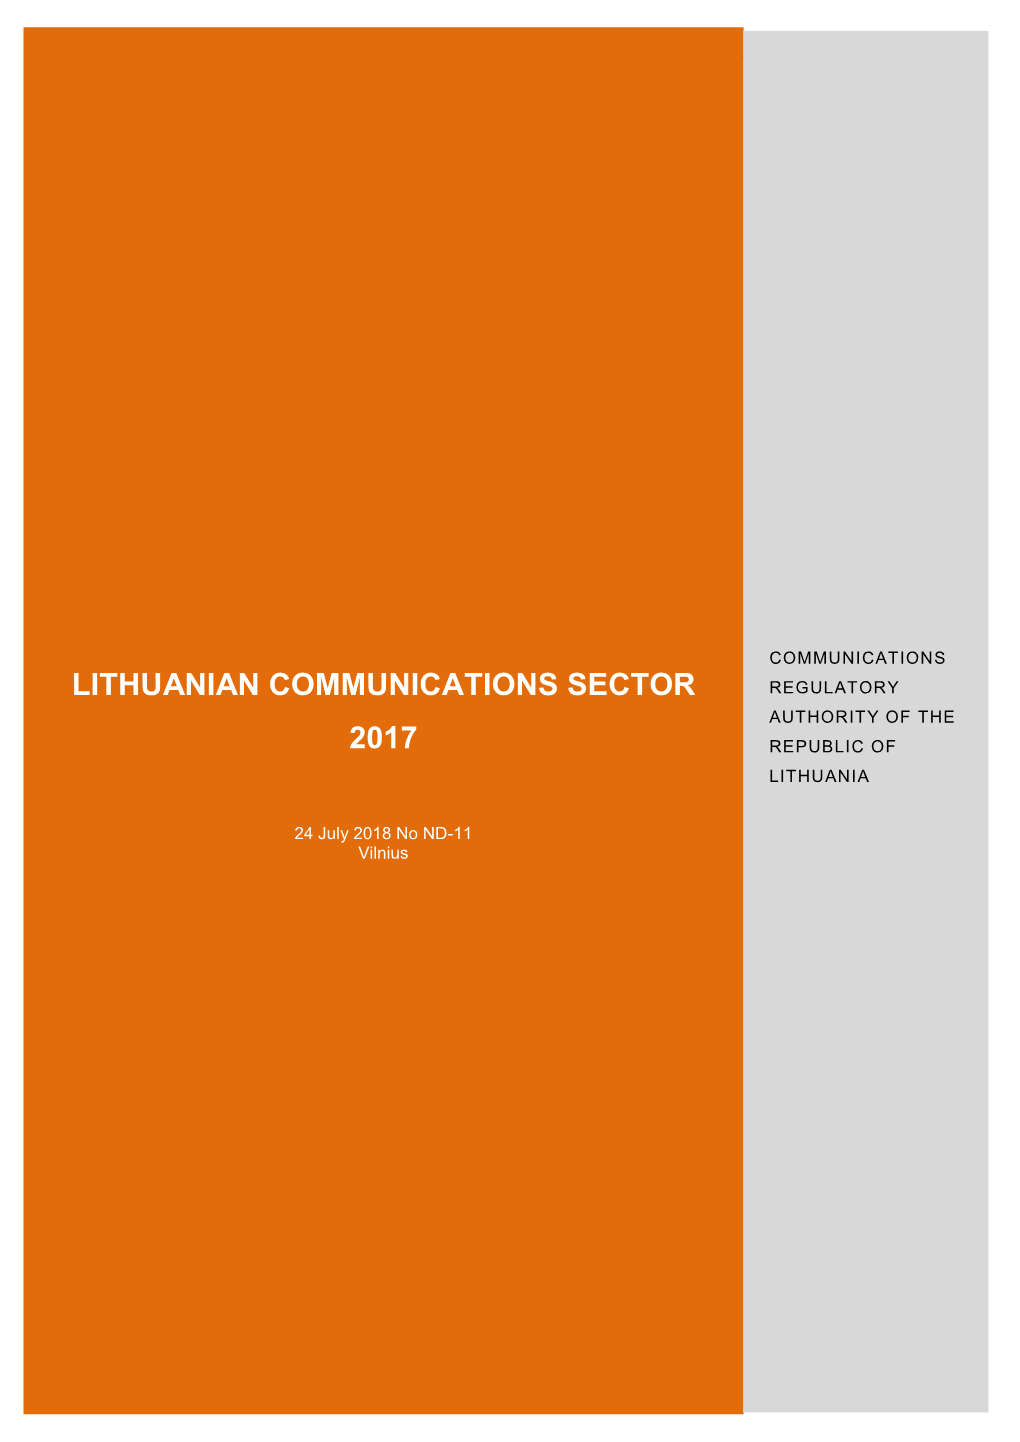 Lithuanian Communications Sector 2017